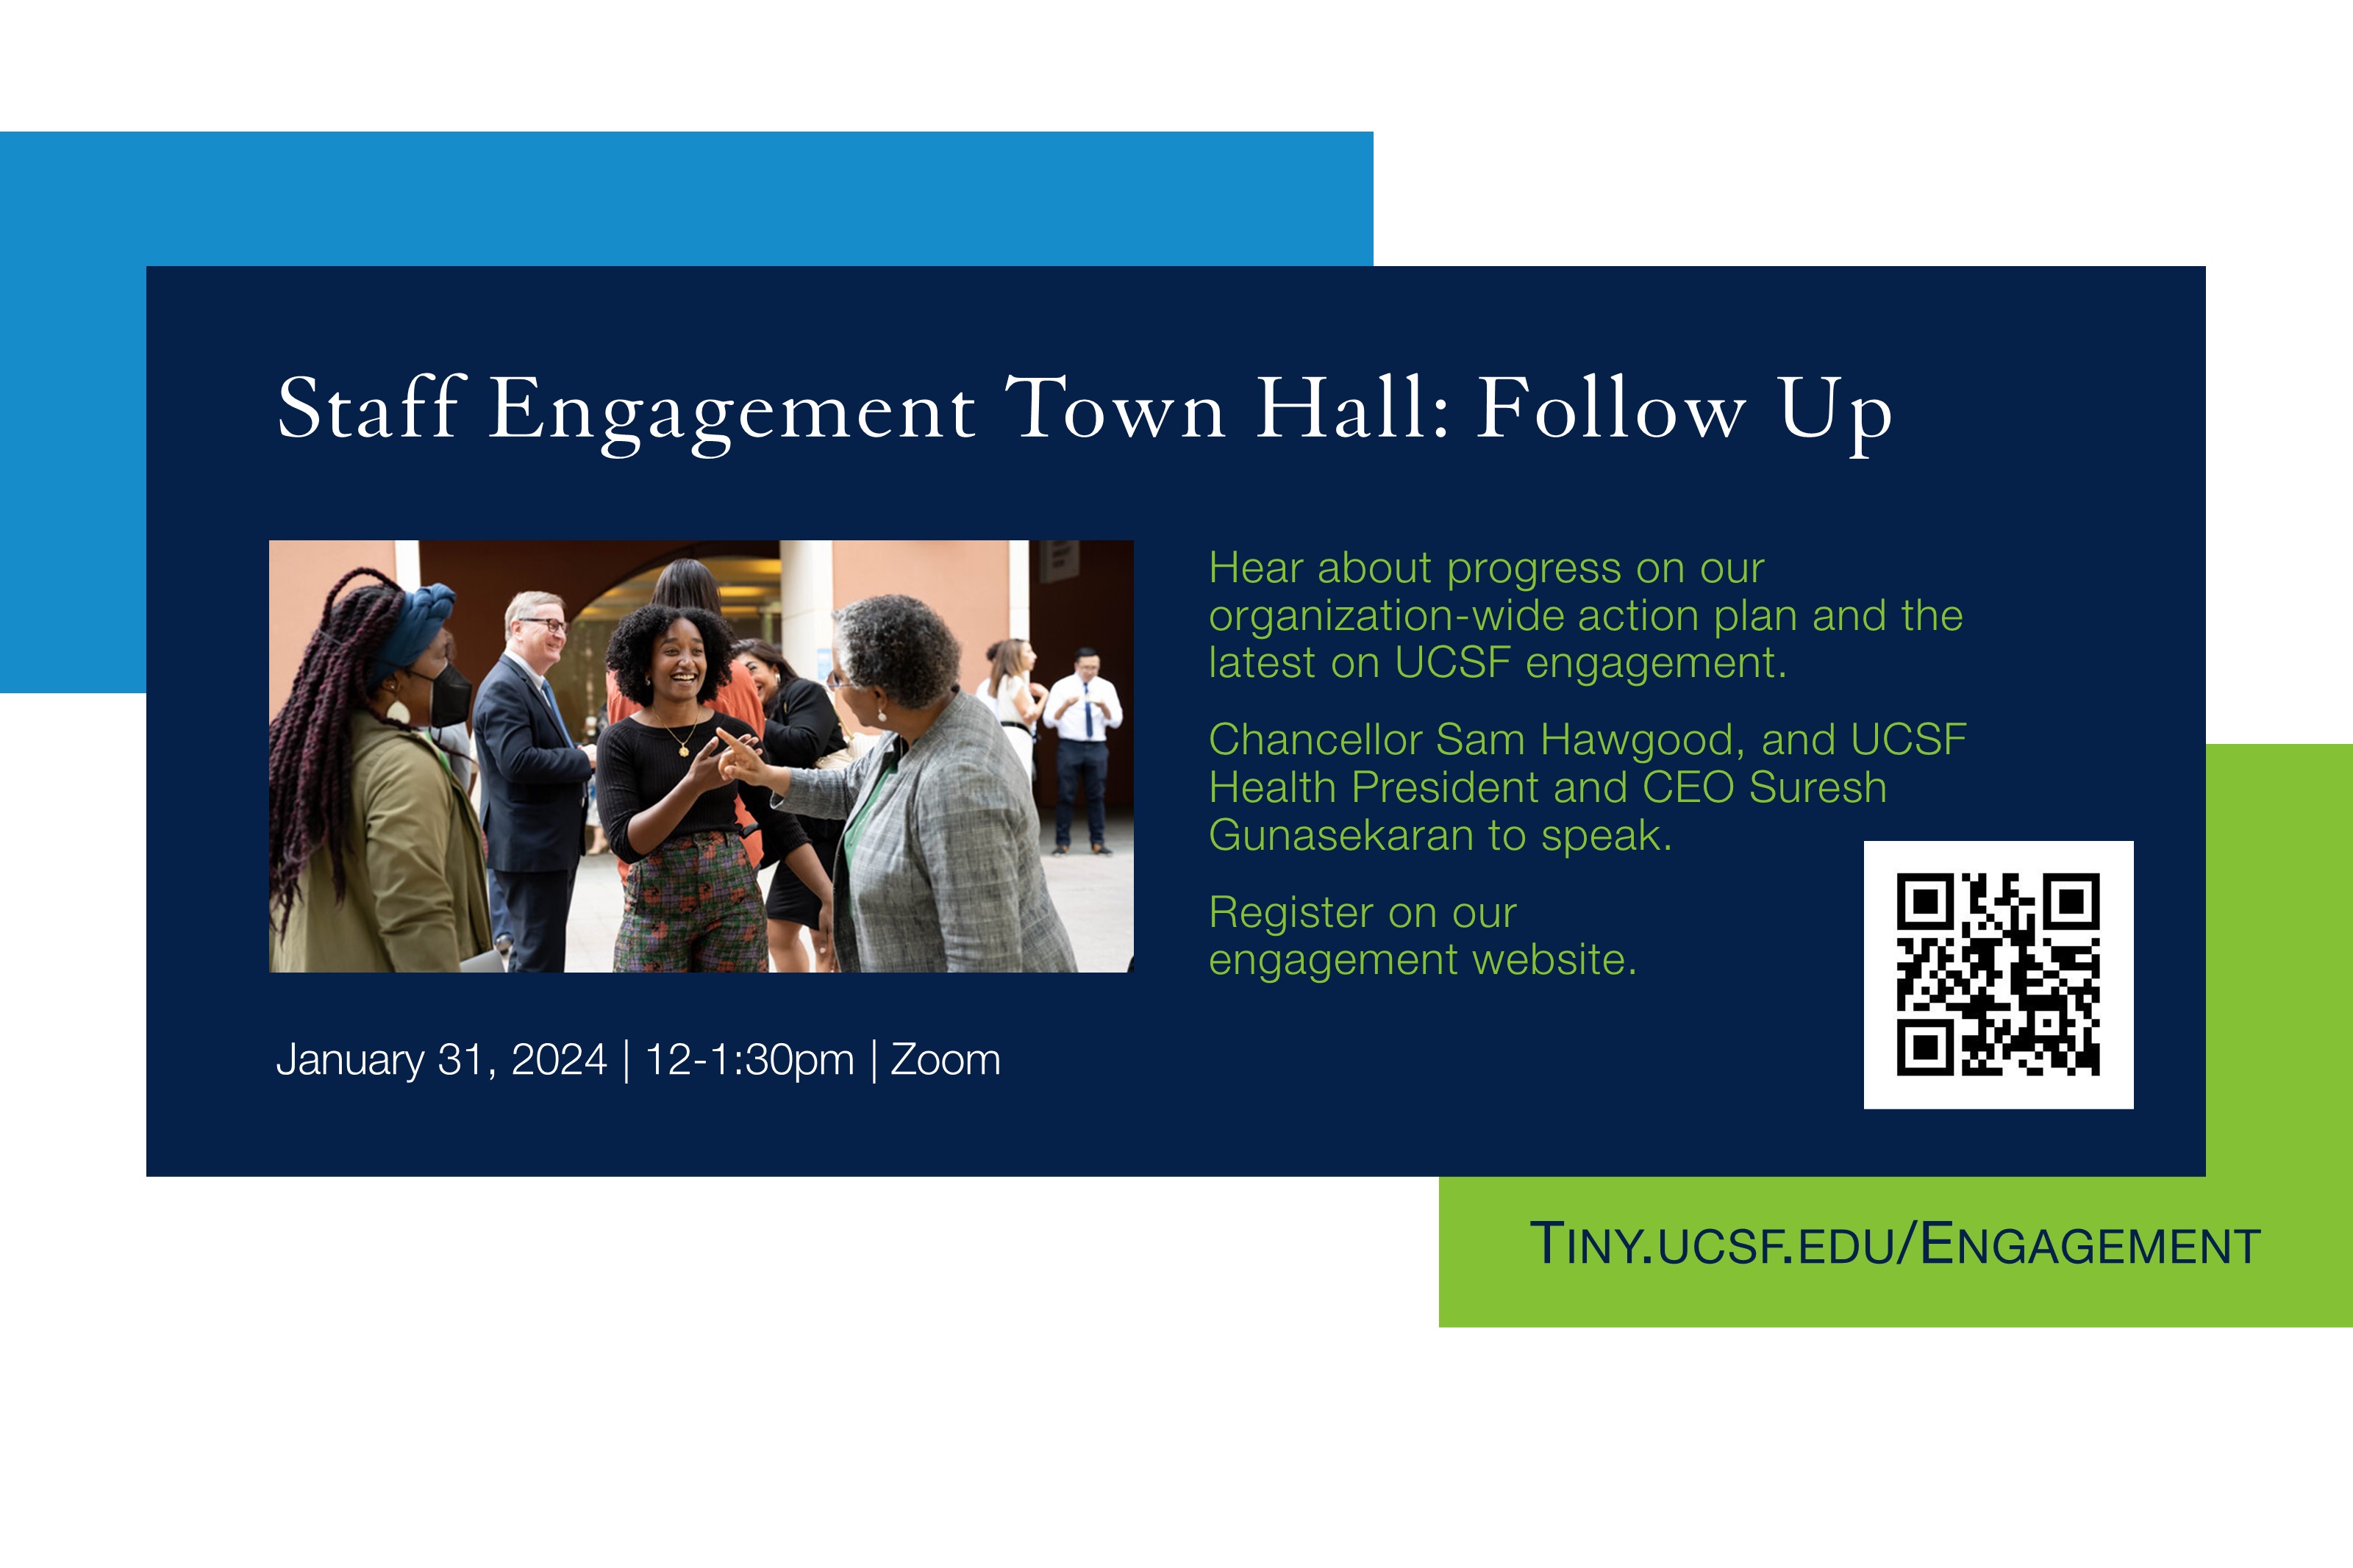 Engagement Town Hall, January 31, 12-1:30pm, Zoom